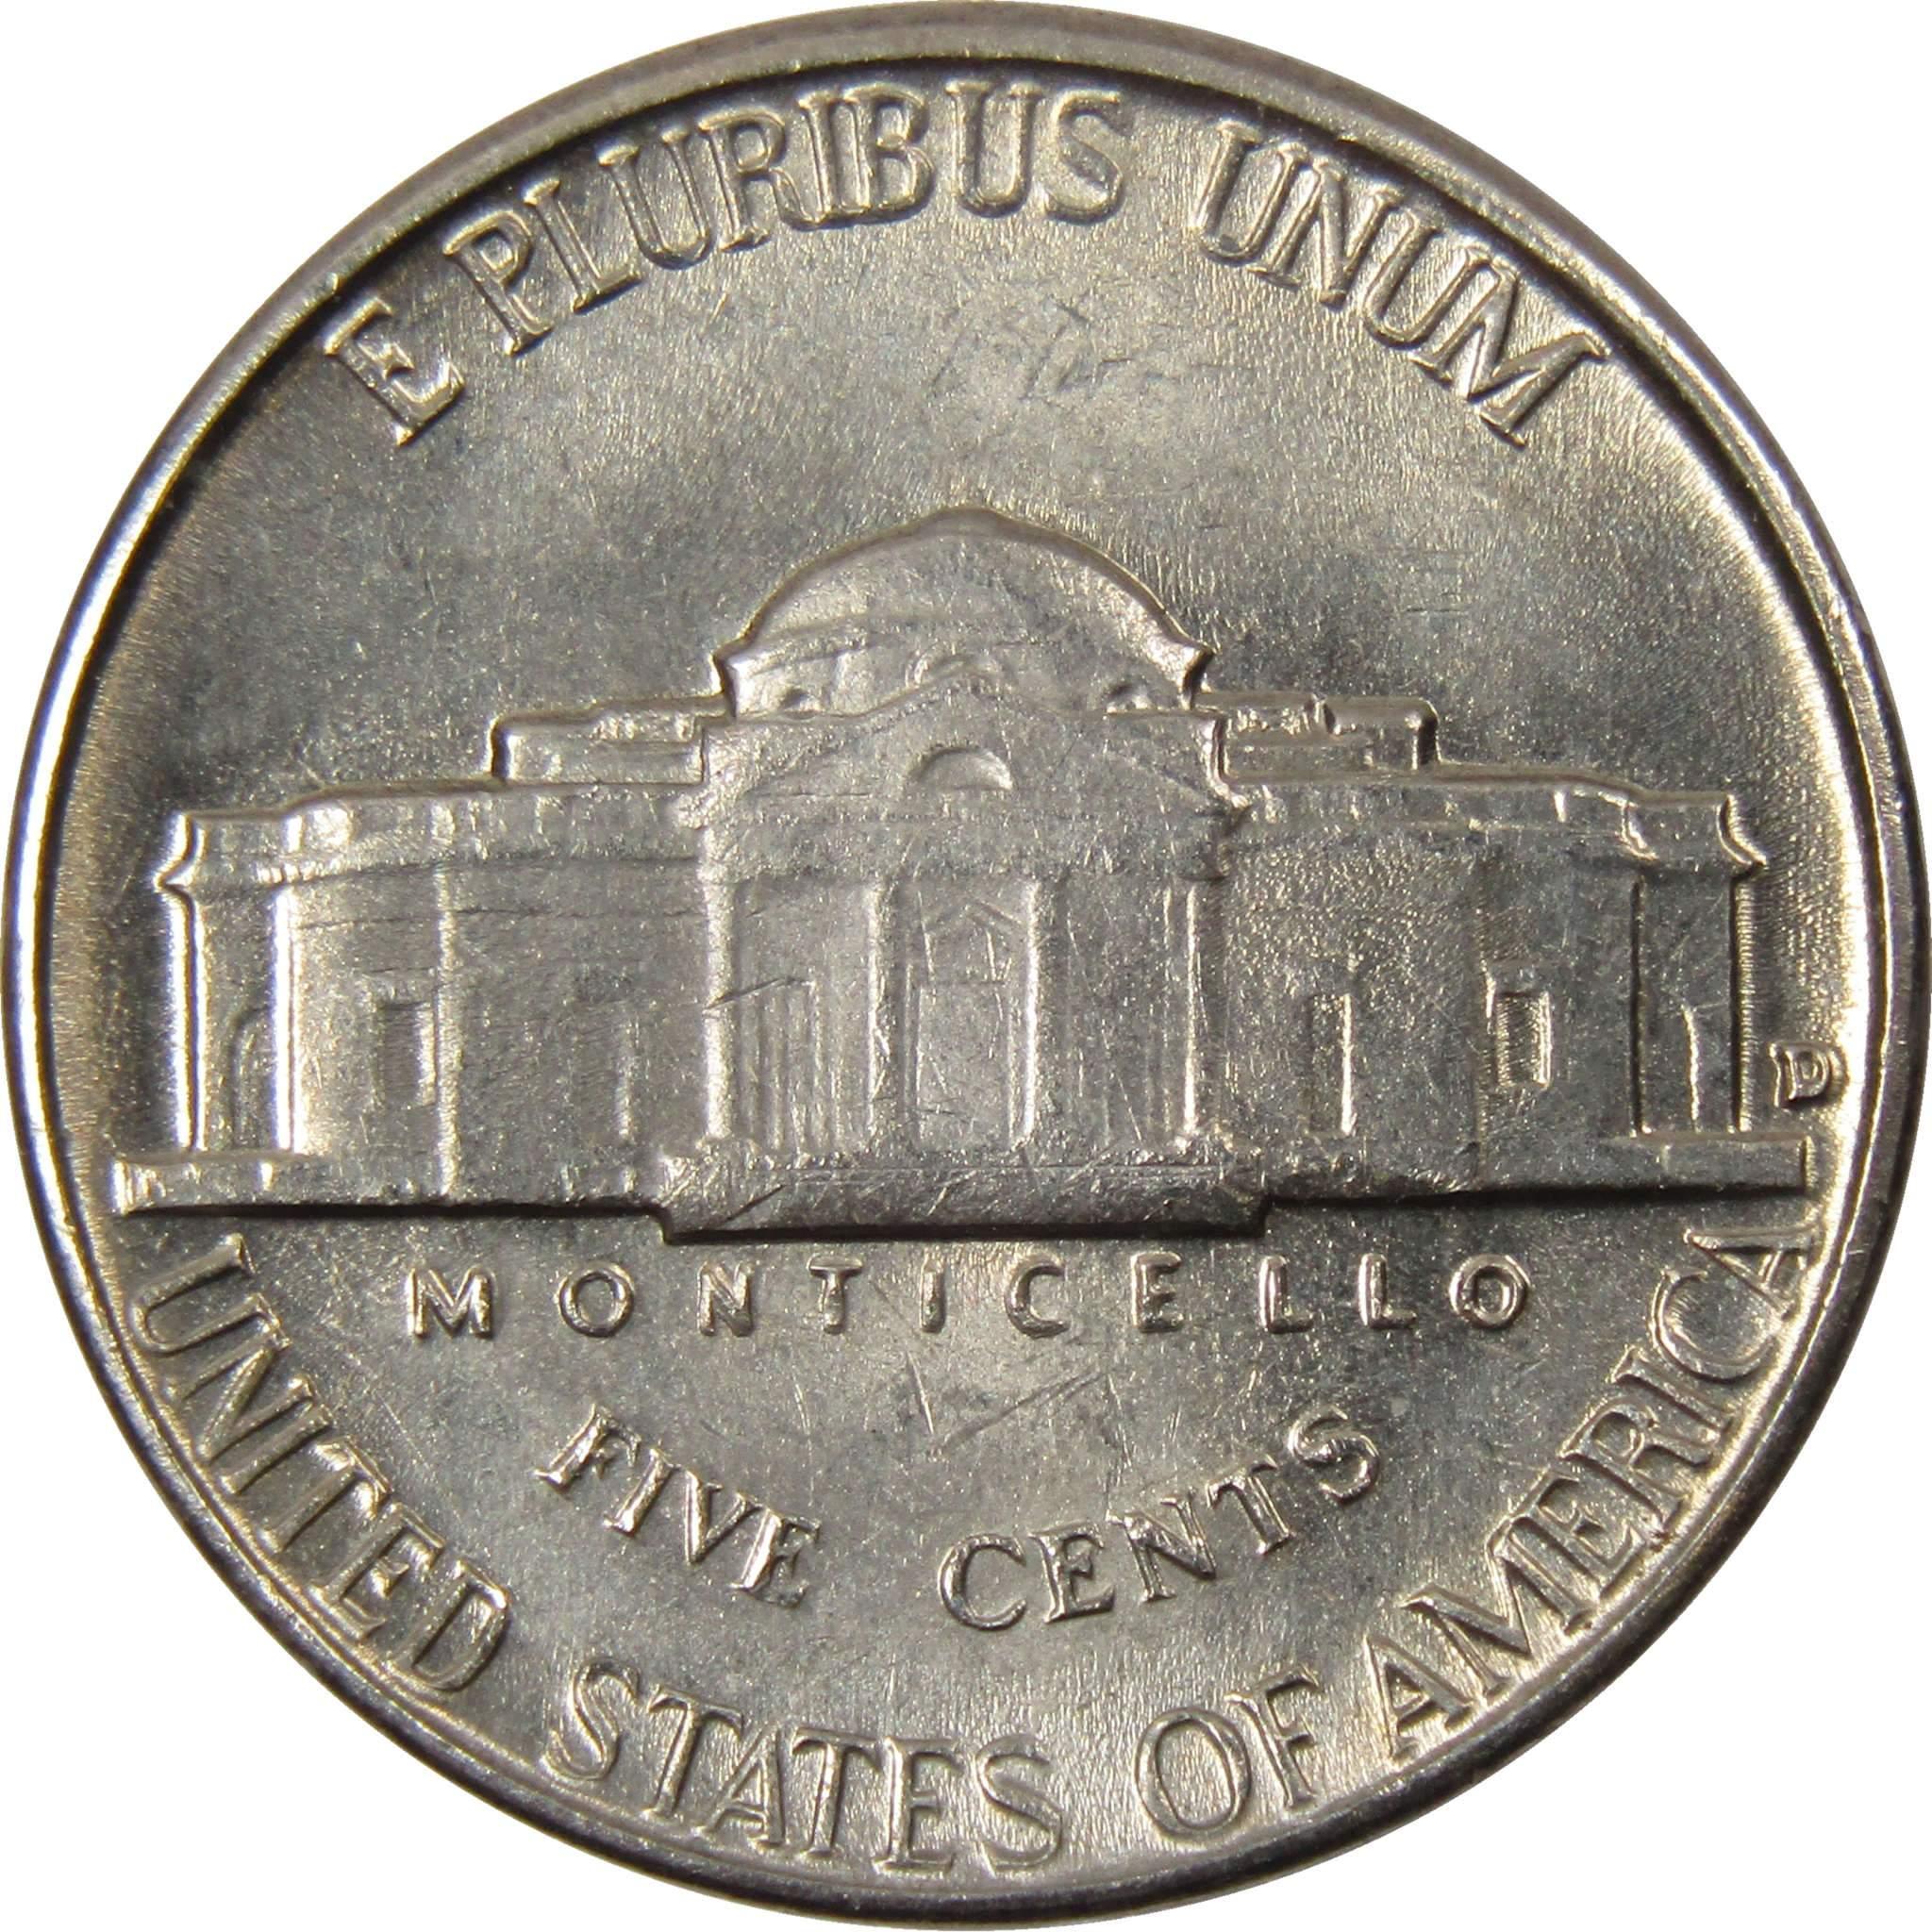 1955 D Jefferson Nickel 5 Cent Piece BU Uncirculated Mint State 5c US Coin